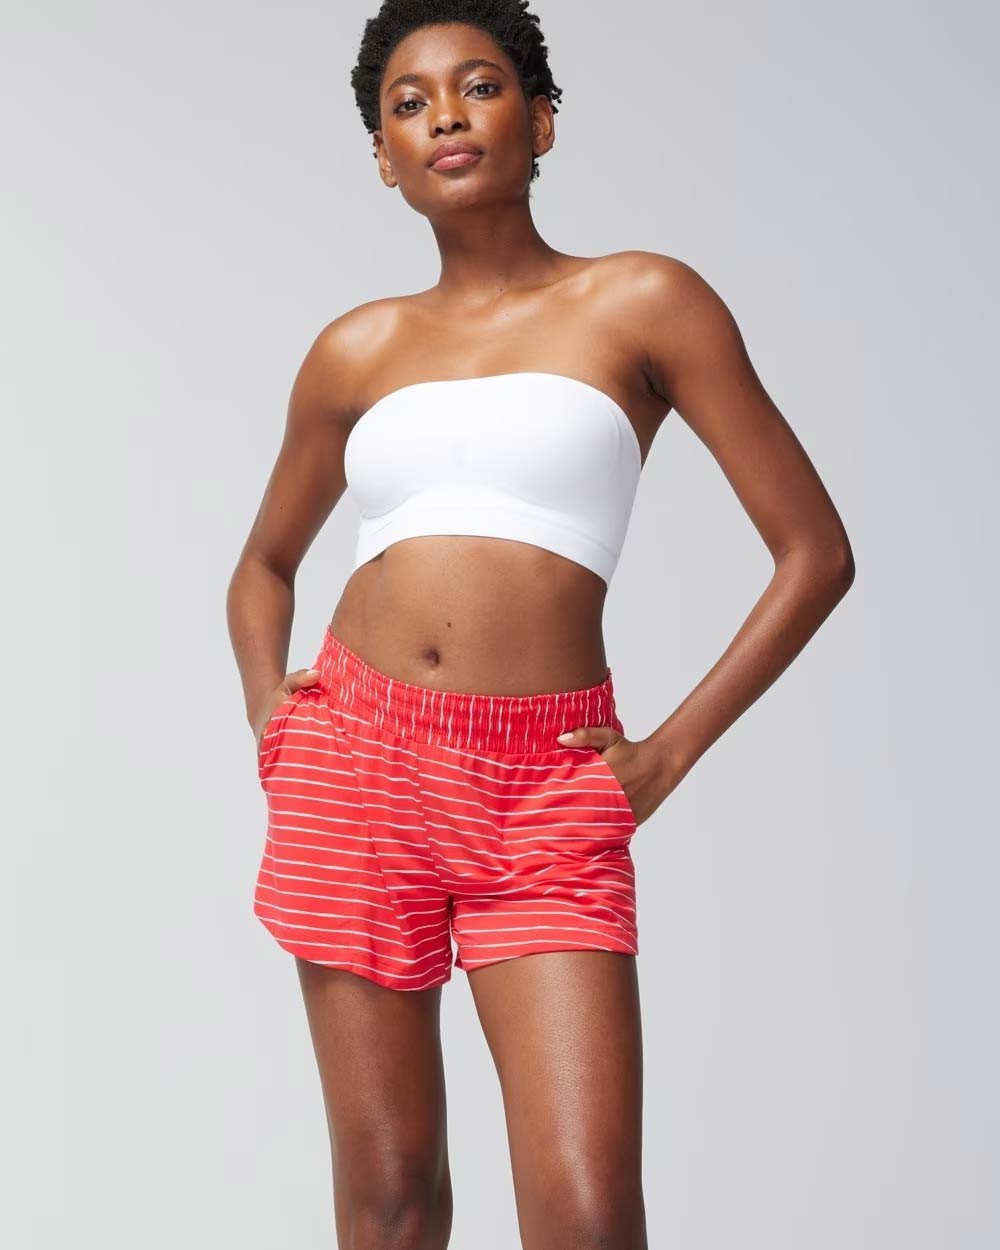 Soma<sup class=st-superscript>®</sup> women’s model wearing red and white striped shorts and a white bandeau bra.